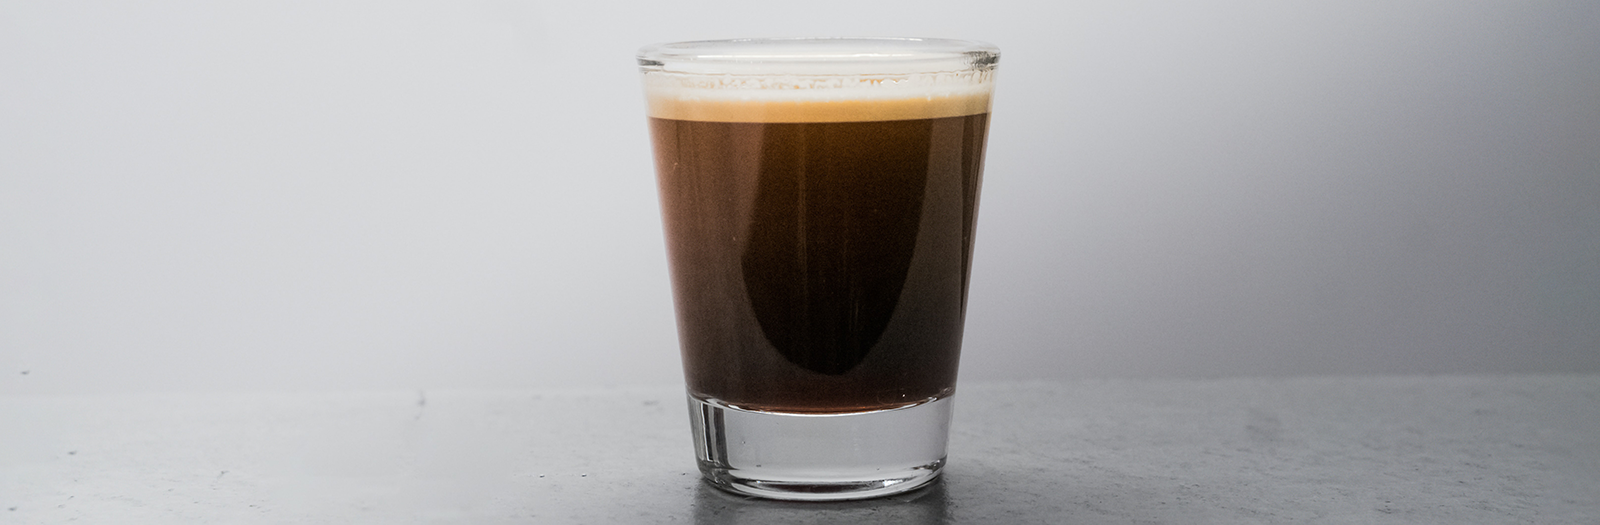 Coffee in clear reusable glass